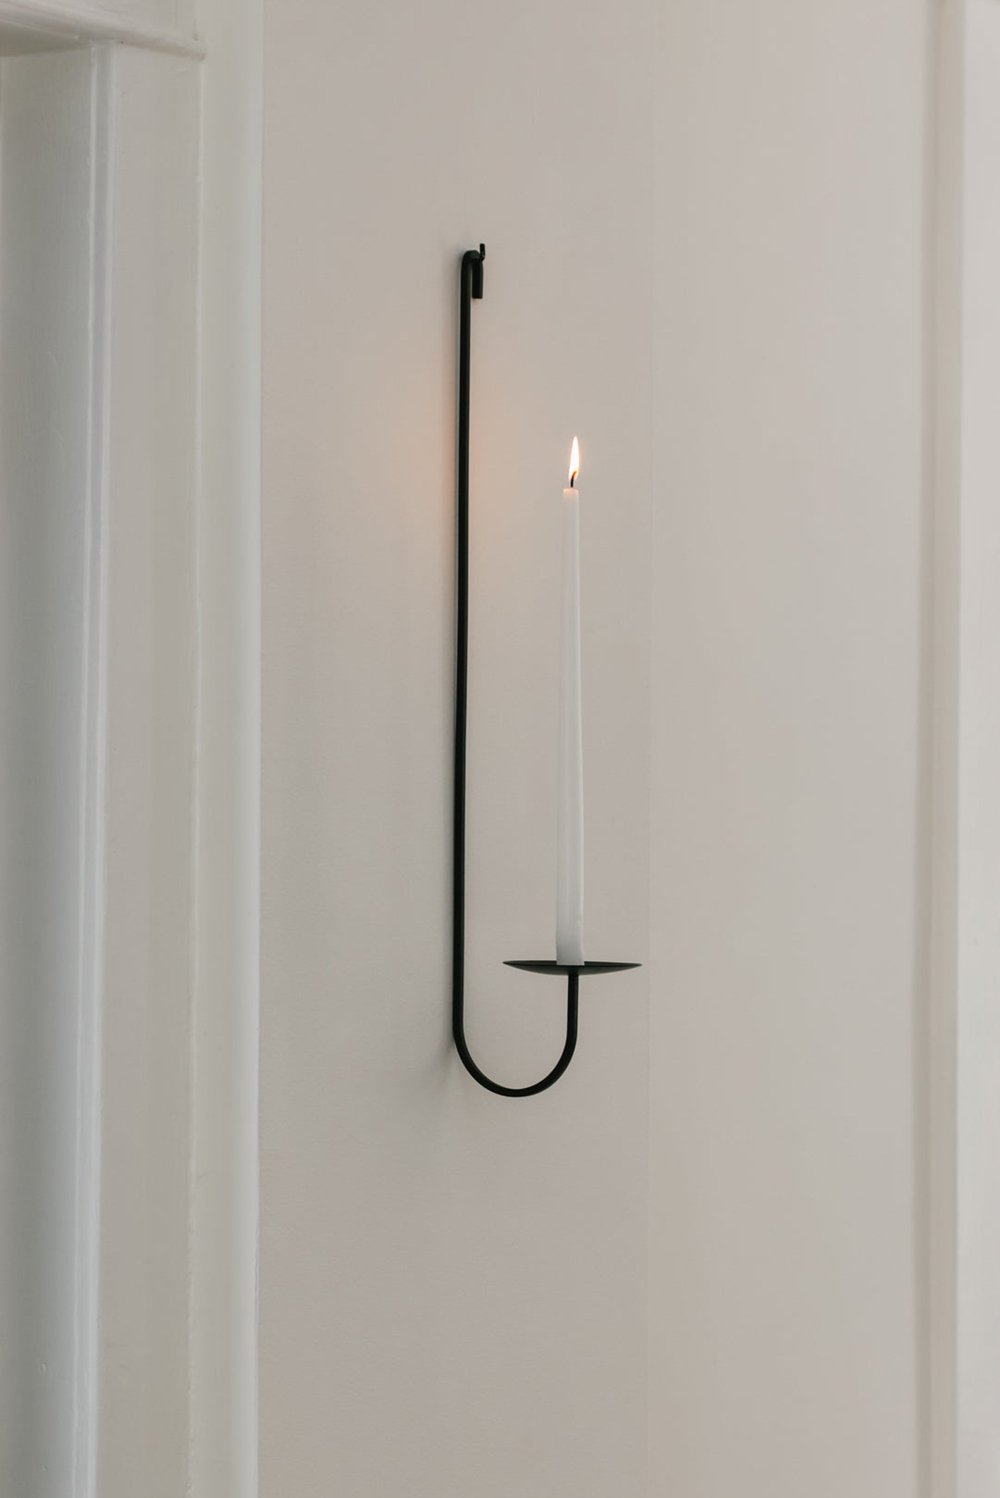 Trend Alert : Candle Holder Wall Sconces - roomfortuesday.com